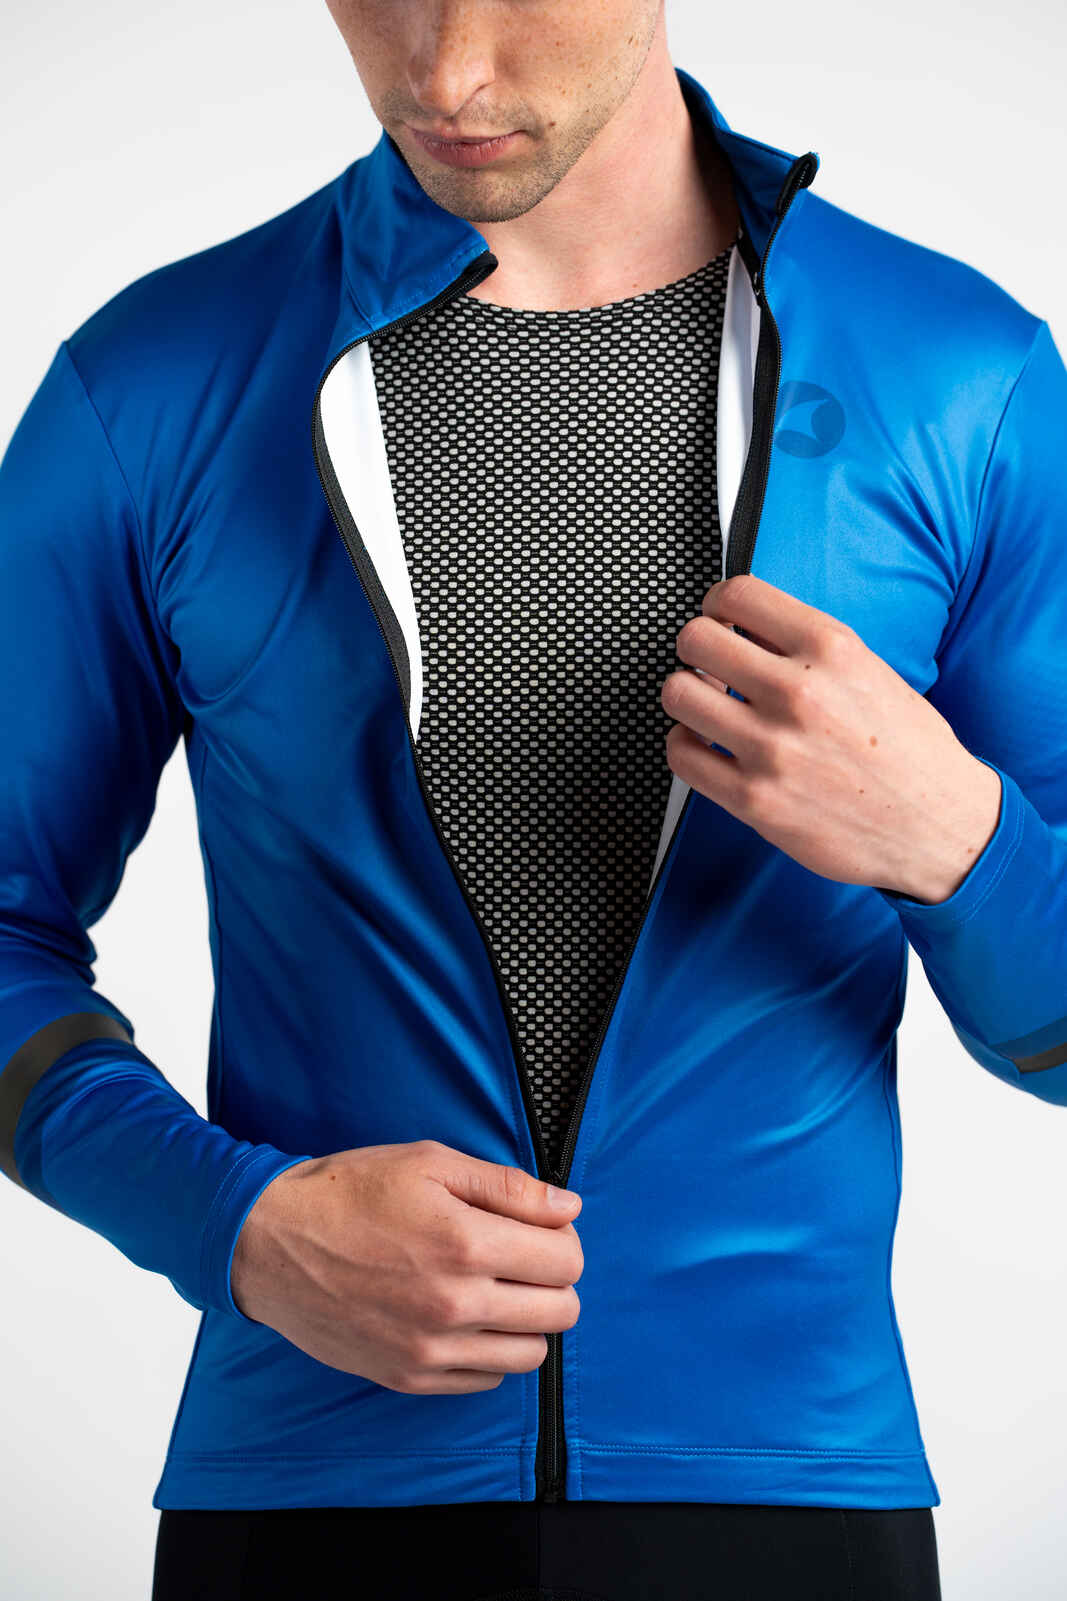 Men's Thermal Cycling Base Layer - Under Jersey